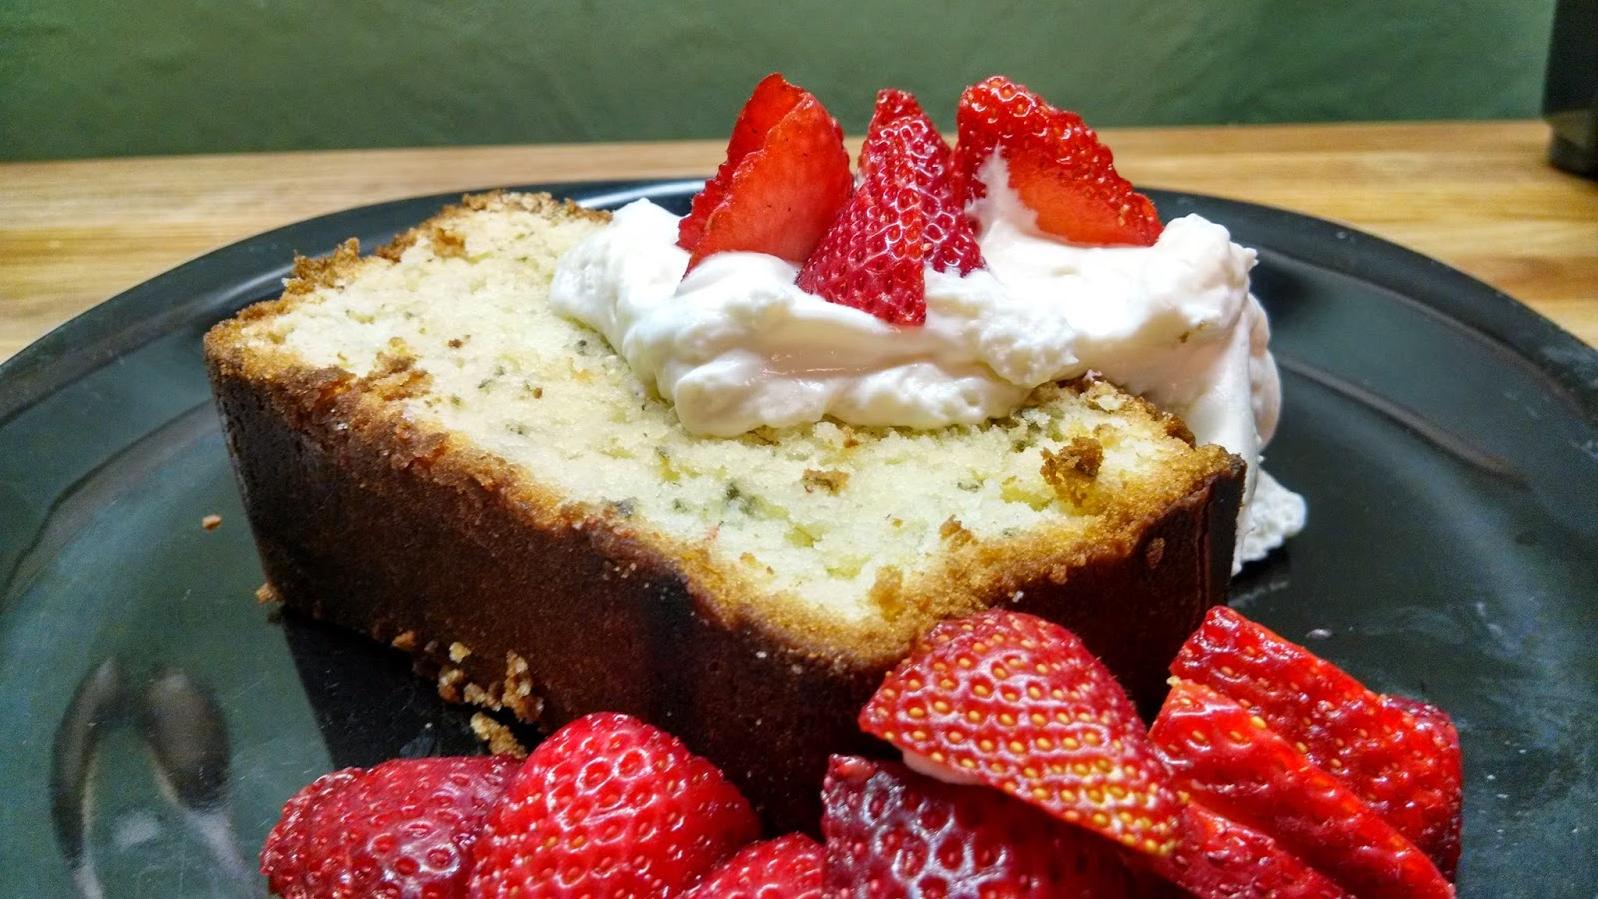  The perfect dessert for any occasion - Lemon Pound Cake with Mint Berries and Cream.